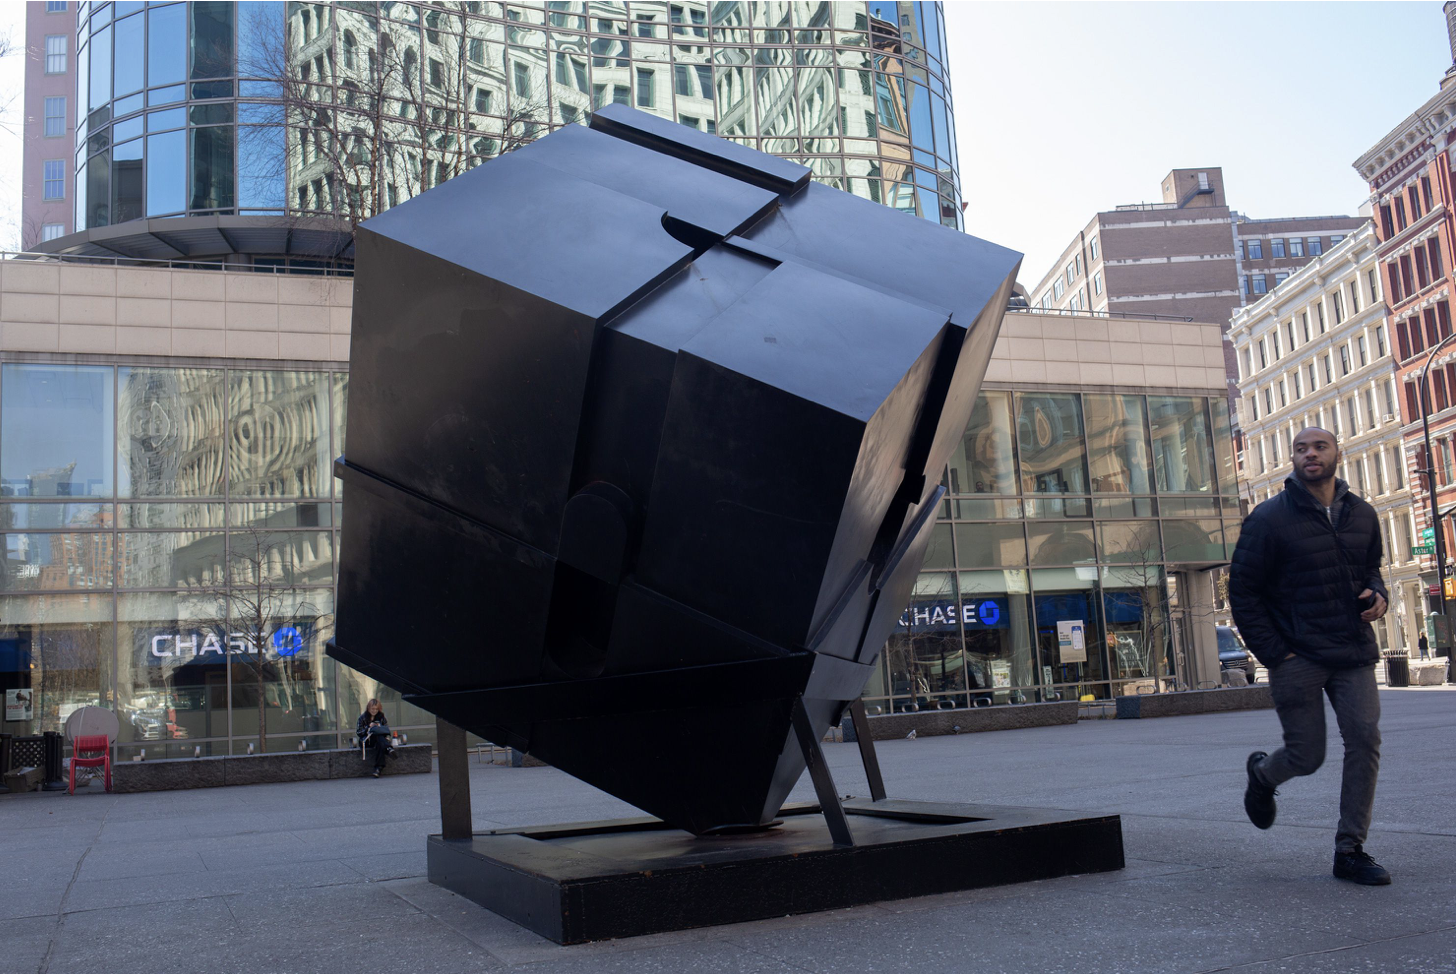 newsjustin.press - Immobilized Astor Place Cube Slated to Spin Again by Summer